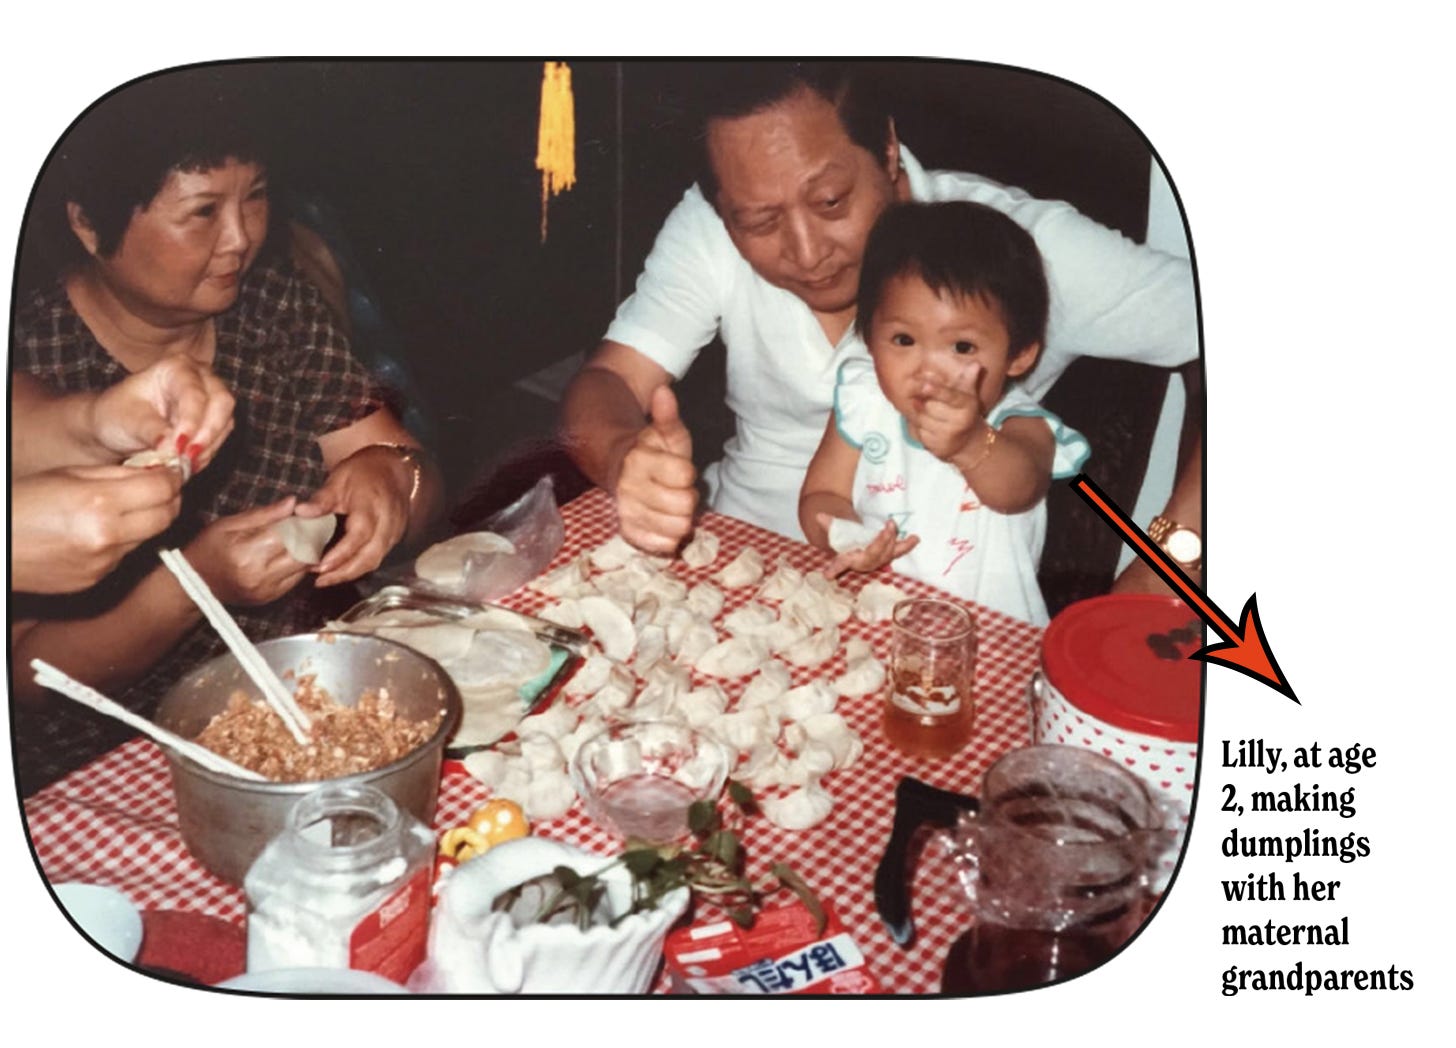 A photo of Lilly Jan, at age 2, making dumplings with her maternal grandparents